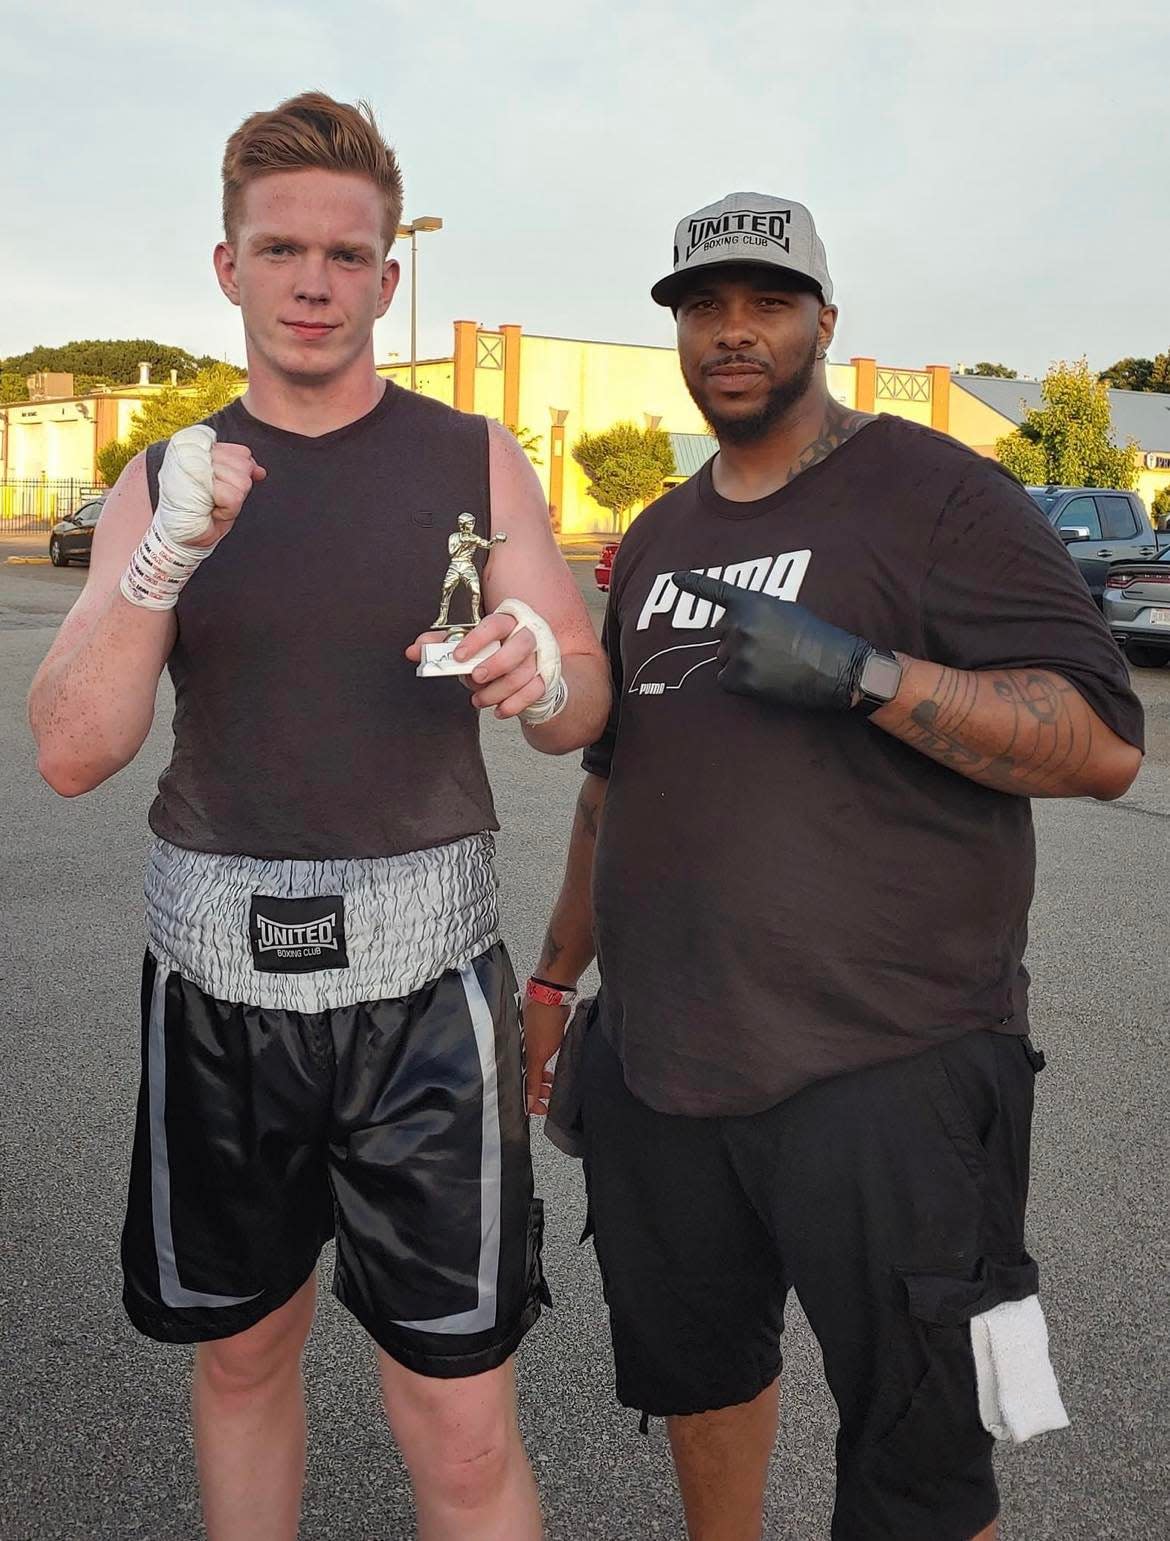 Nate Goodwin, 21, of Canton, left, is shown with Markees Watkins, owner of United Boxing Club in Canton. Goodwin is an amateur heavyweight boxer who will be fighting March 9 in The Brawl II at the Canton Memorial Civic Center.